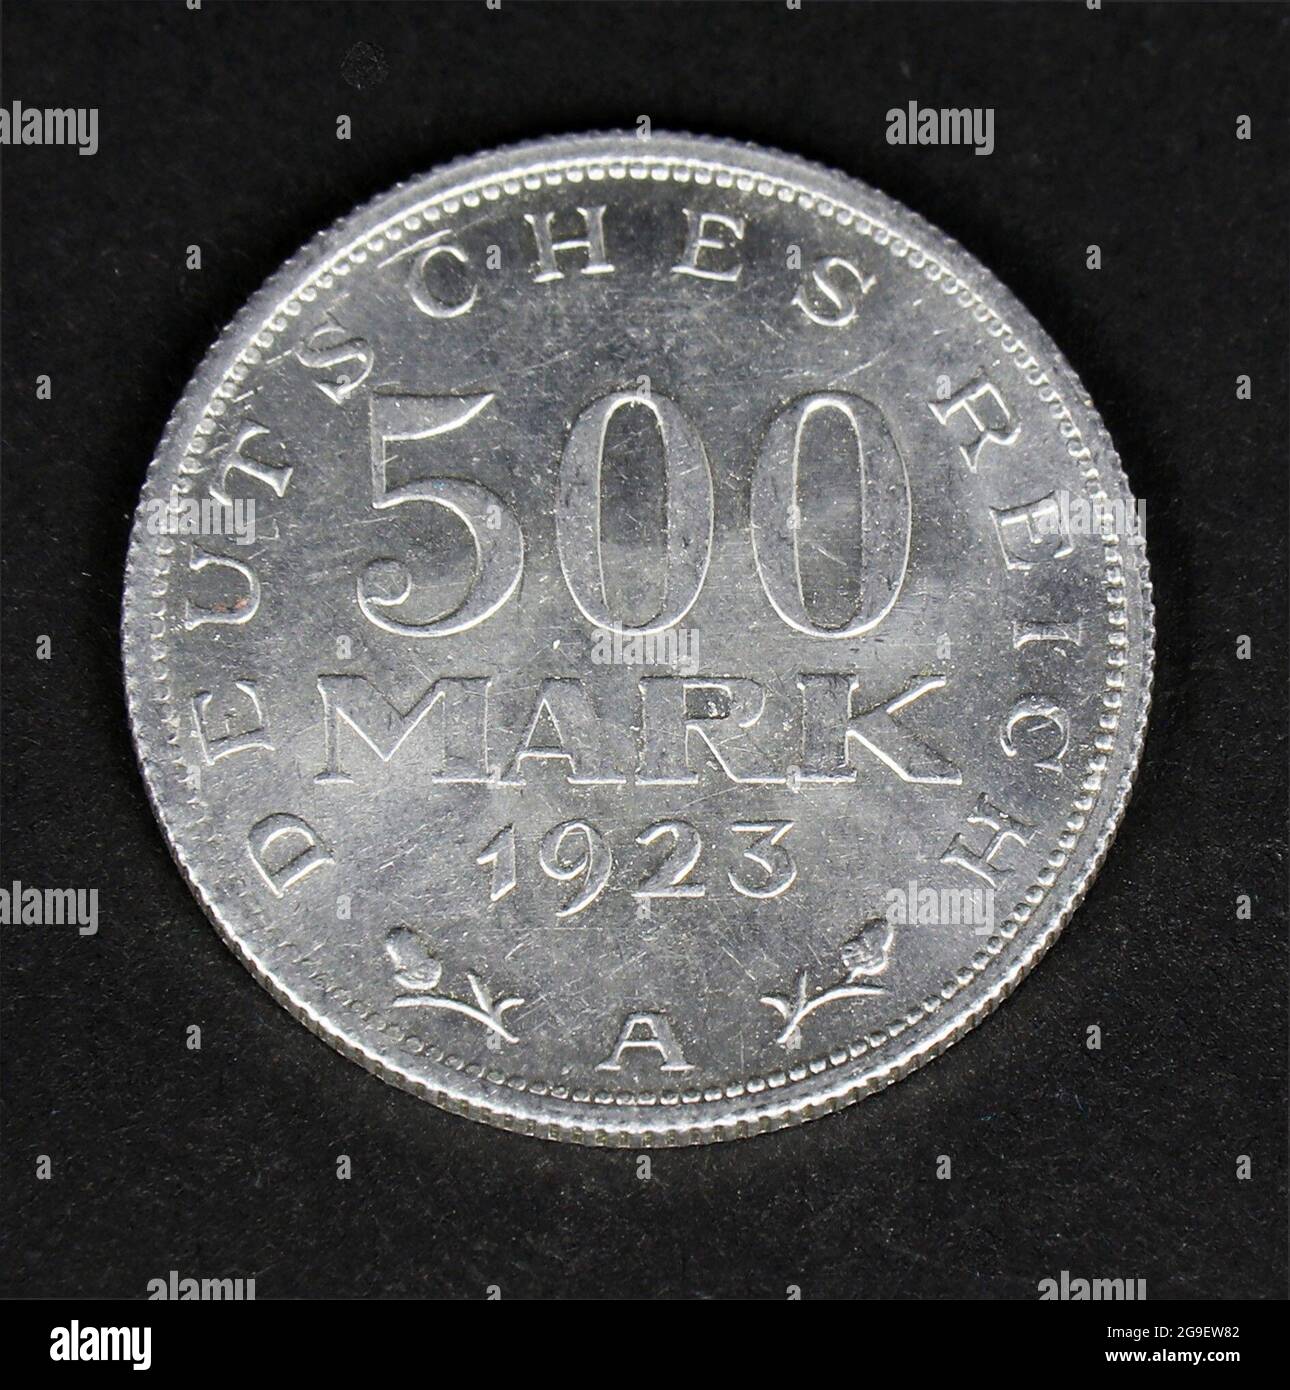 money / finances, coins, Germany, inflation coin, 500 mark, obverse, aluminum, German Reich, 1923, ADDITIONAL-RIGHTS-CLEARANCE-INFO-NOT-AVAILABLE Stock Photo